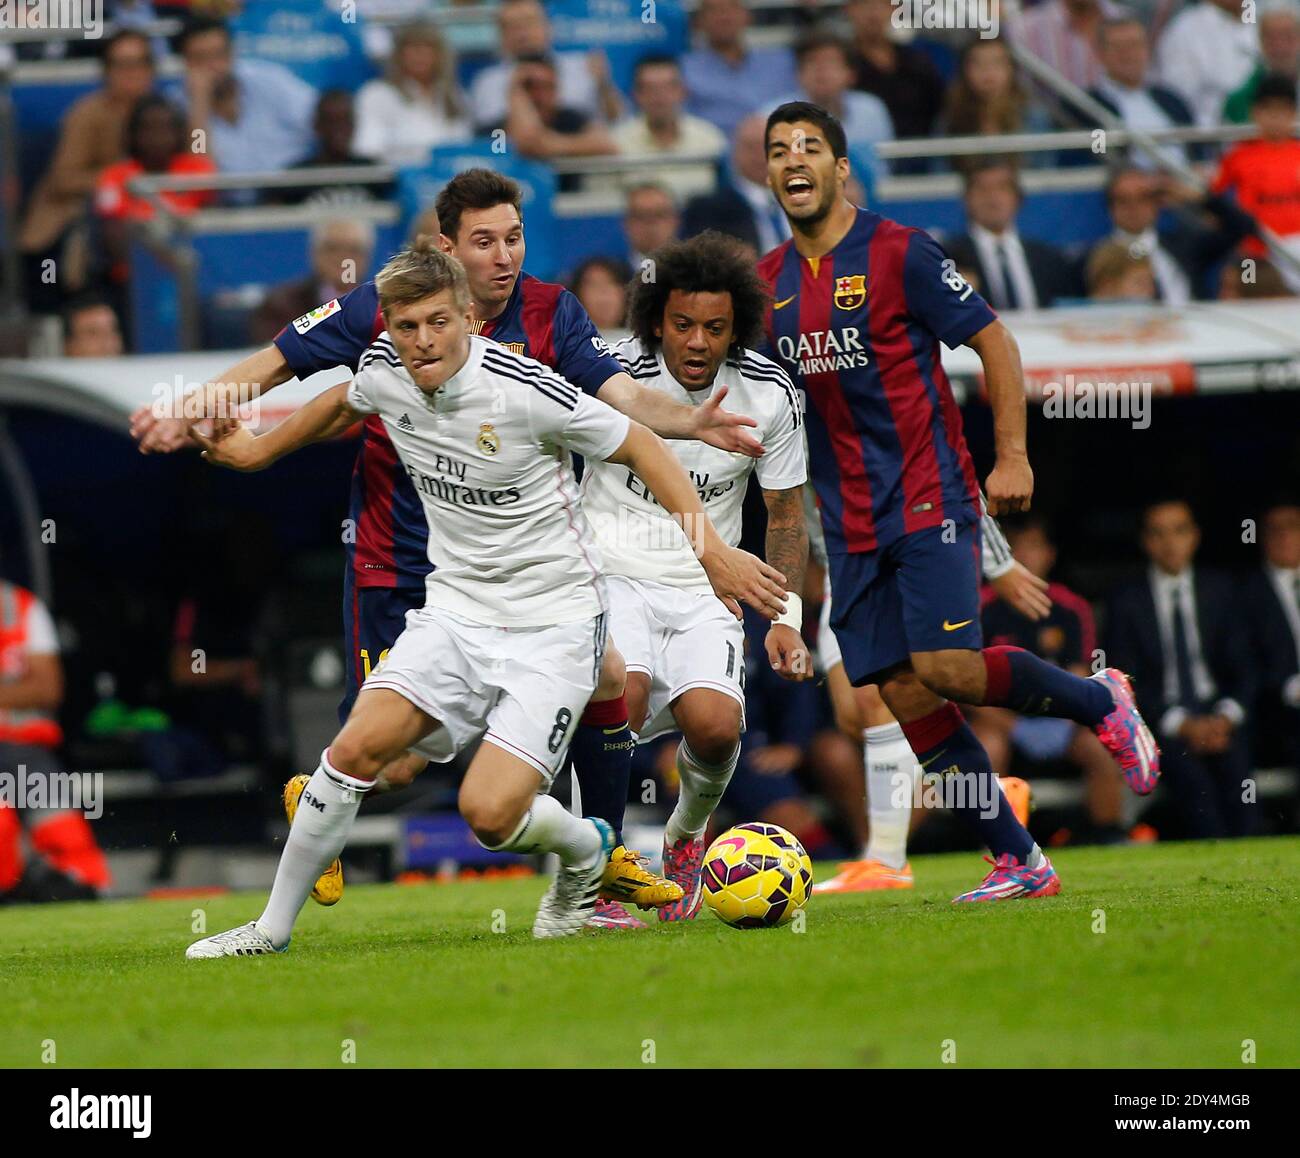 Toni Kroos, Real Madrid, left, here with Lilonel Messi, FC Barcelona ,right and Marcelo, Real Madrid, far right and Luis Suarez, Barcelona, behind during the Spanish La Liga soccer match, Real Madrid Vs FC Barcelona at Santiago Bernabeu stadium in Madrid, Spain on October 25, 2014. Photo by Giuliano Bevilacqua/ABACAPRESS.COM Stock Photo